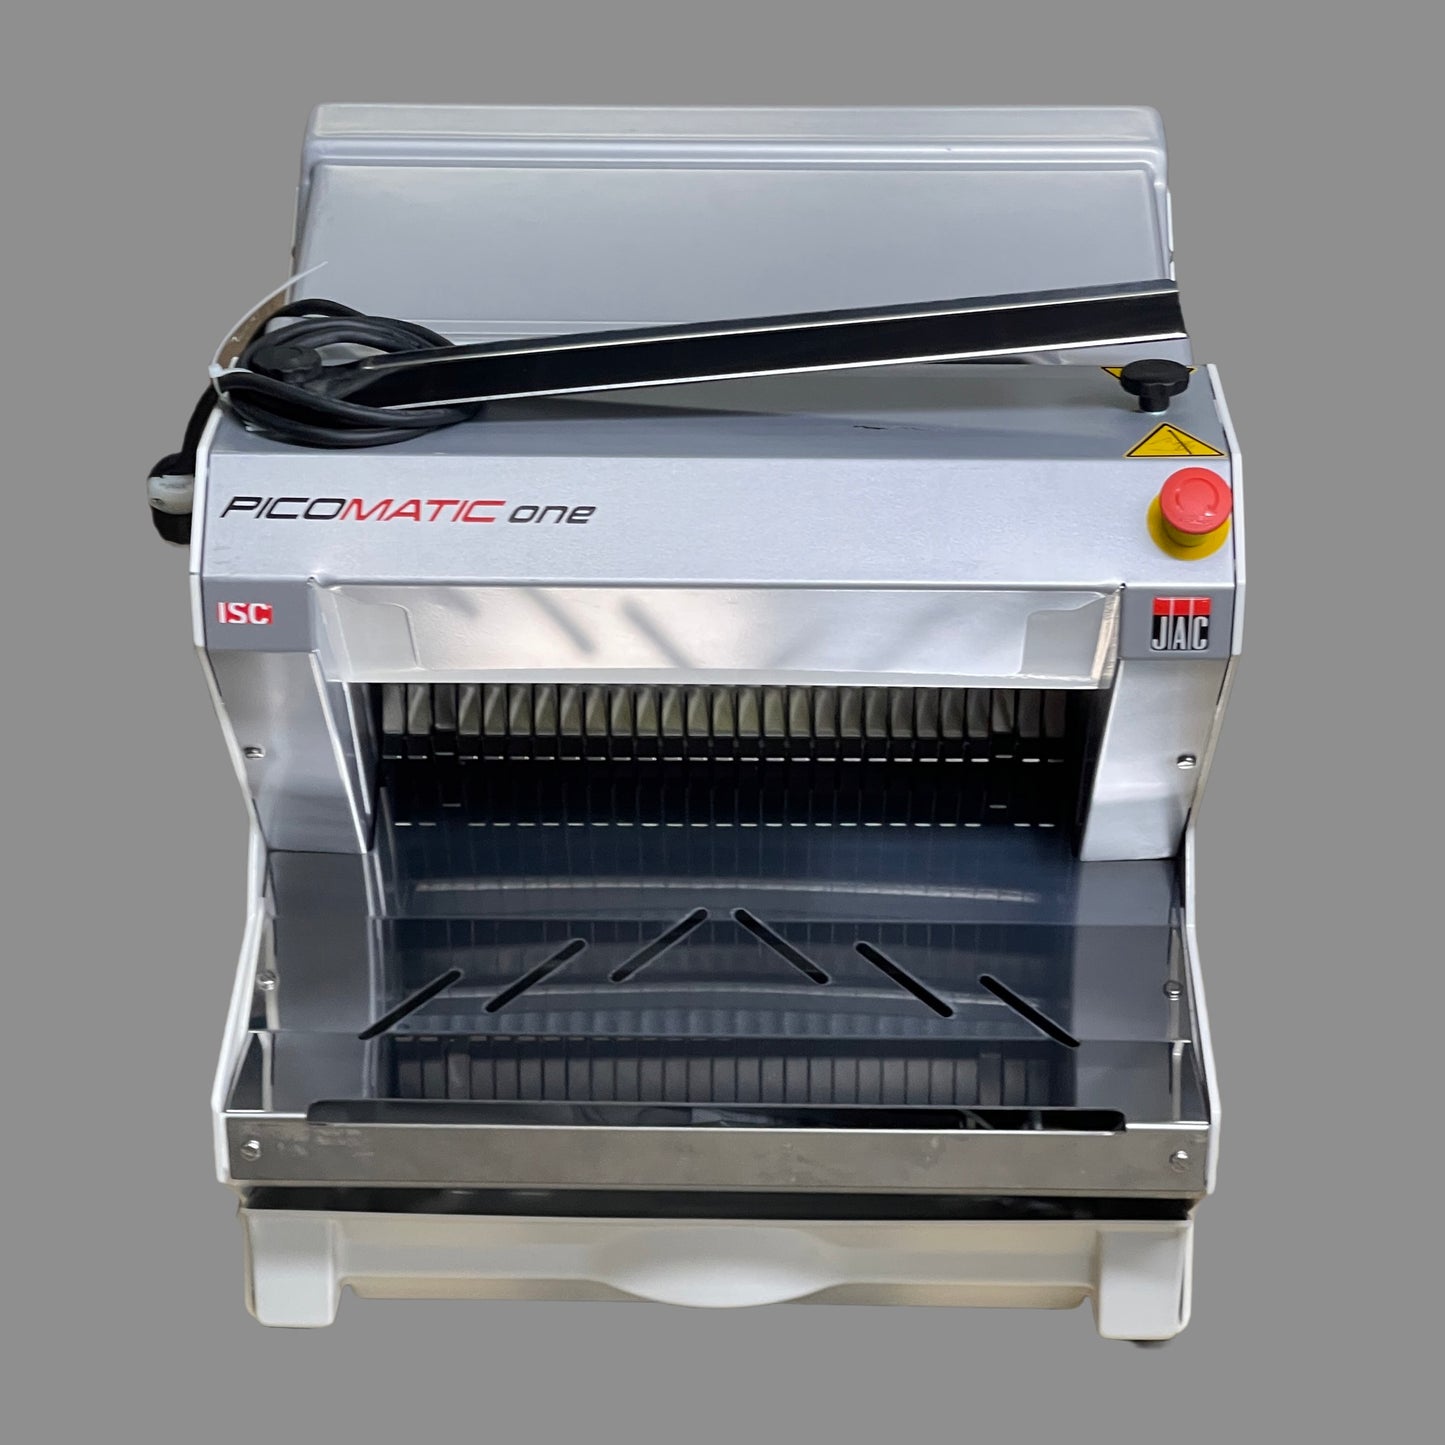 JAC Picomatic One Countertop Bread Slicer 200 Loaves / Hour MRP 450/16 (New Other)